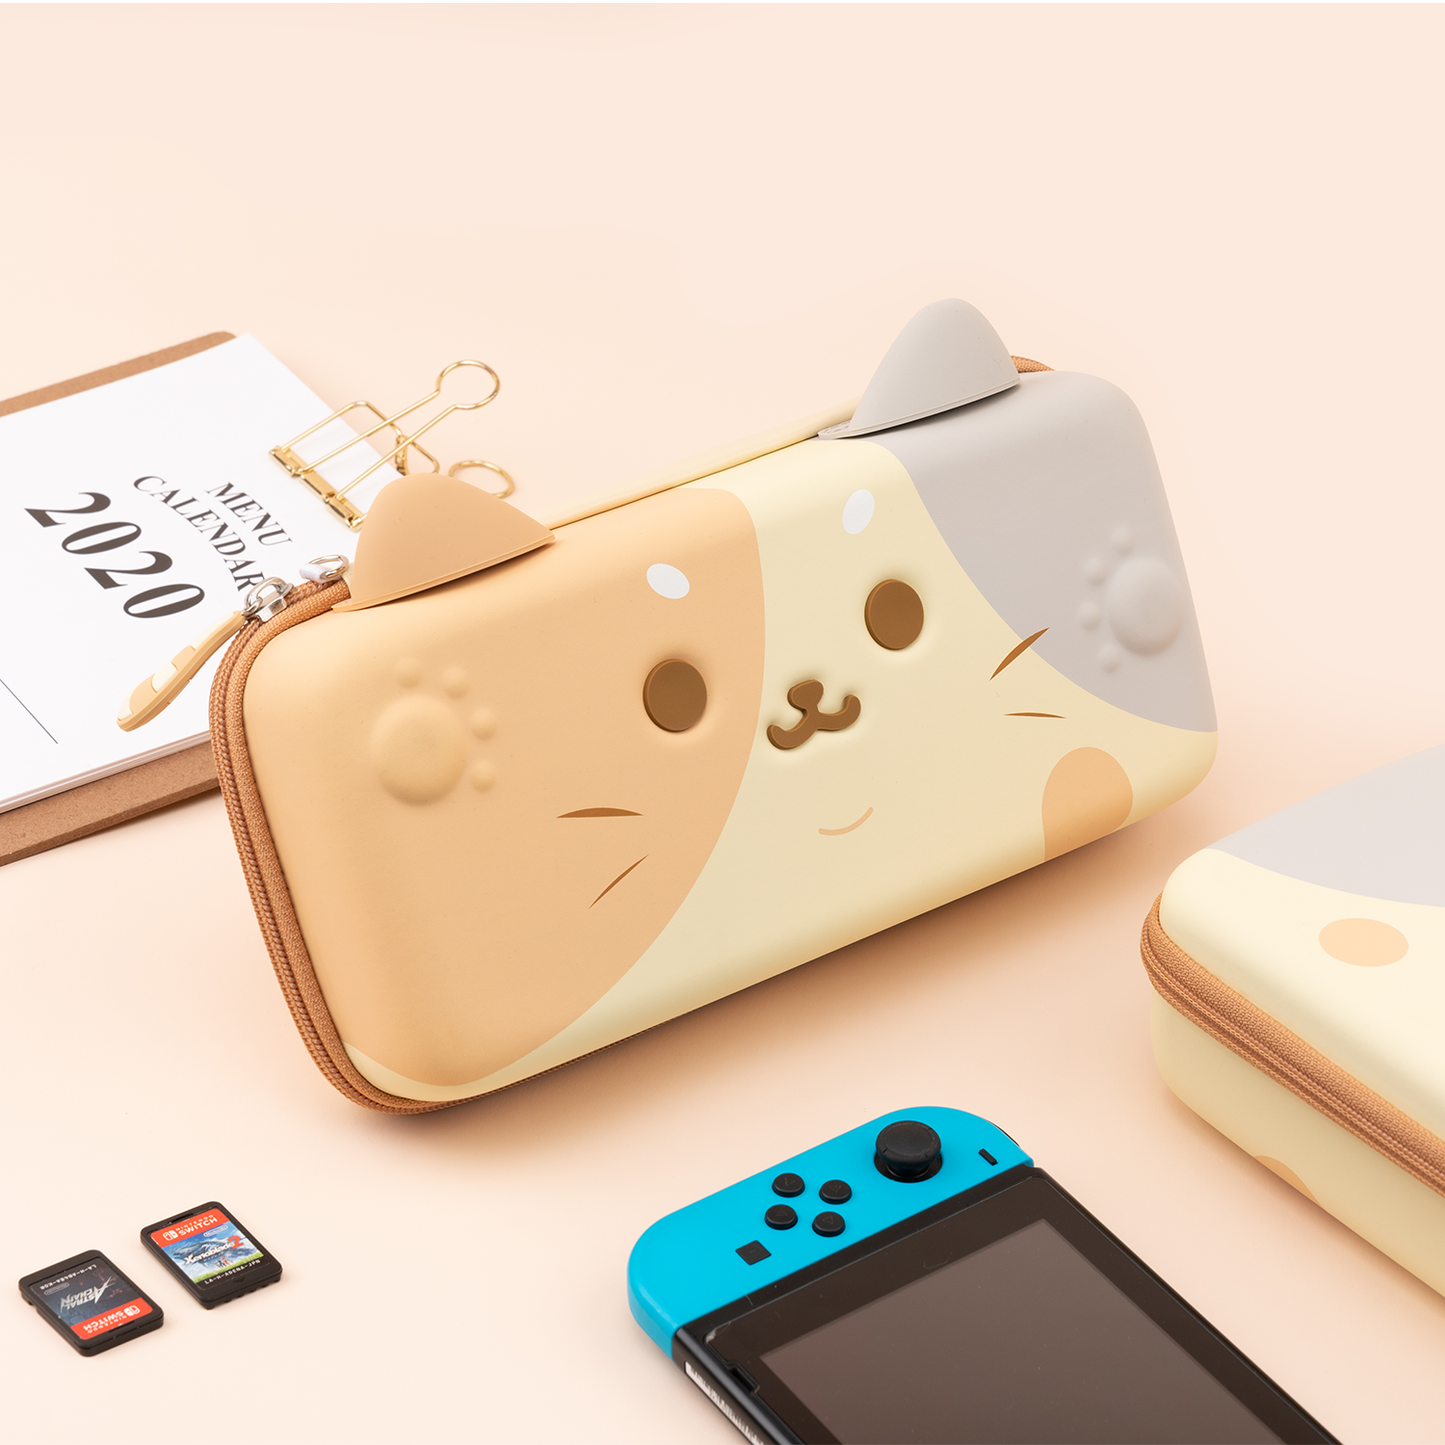 GeekShare Calico Cat Carrying Case For Switch/Oled